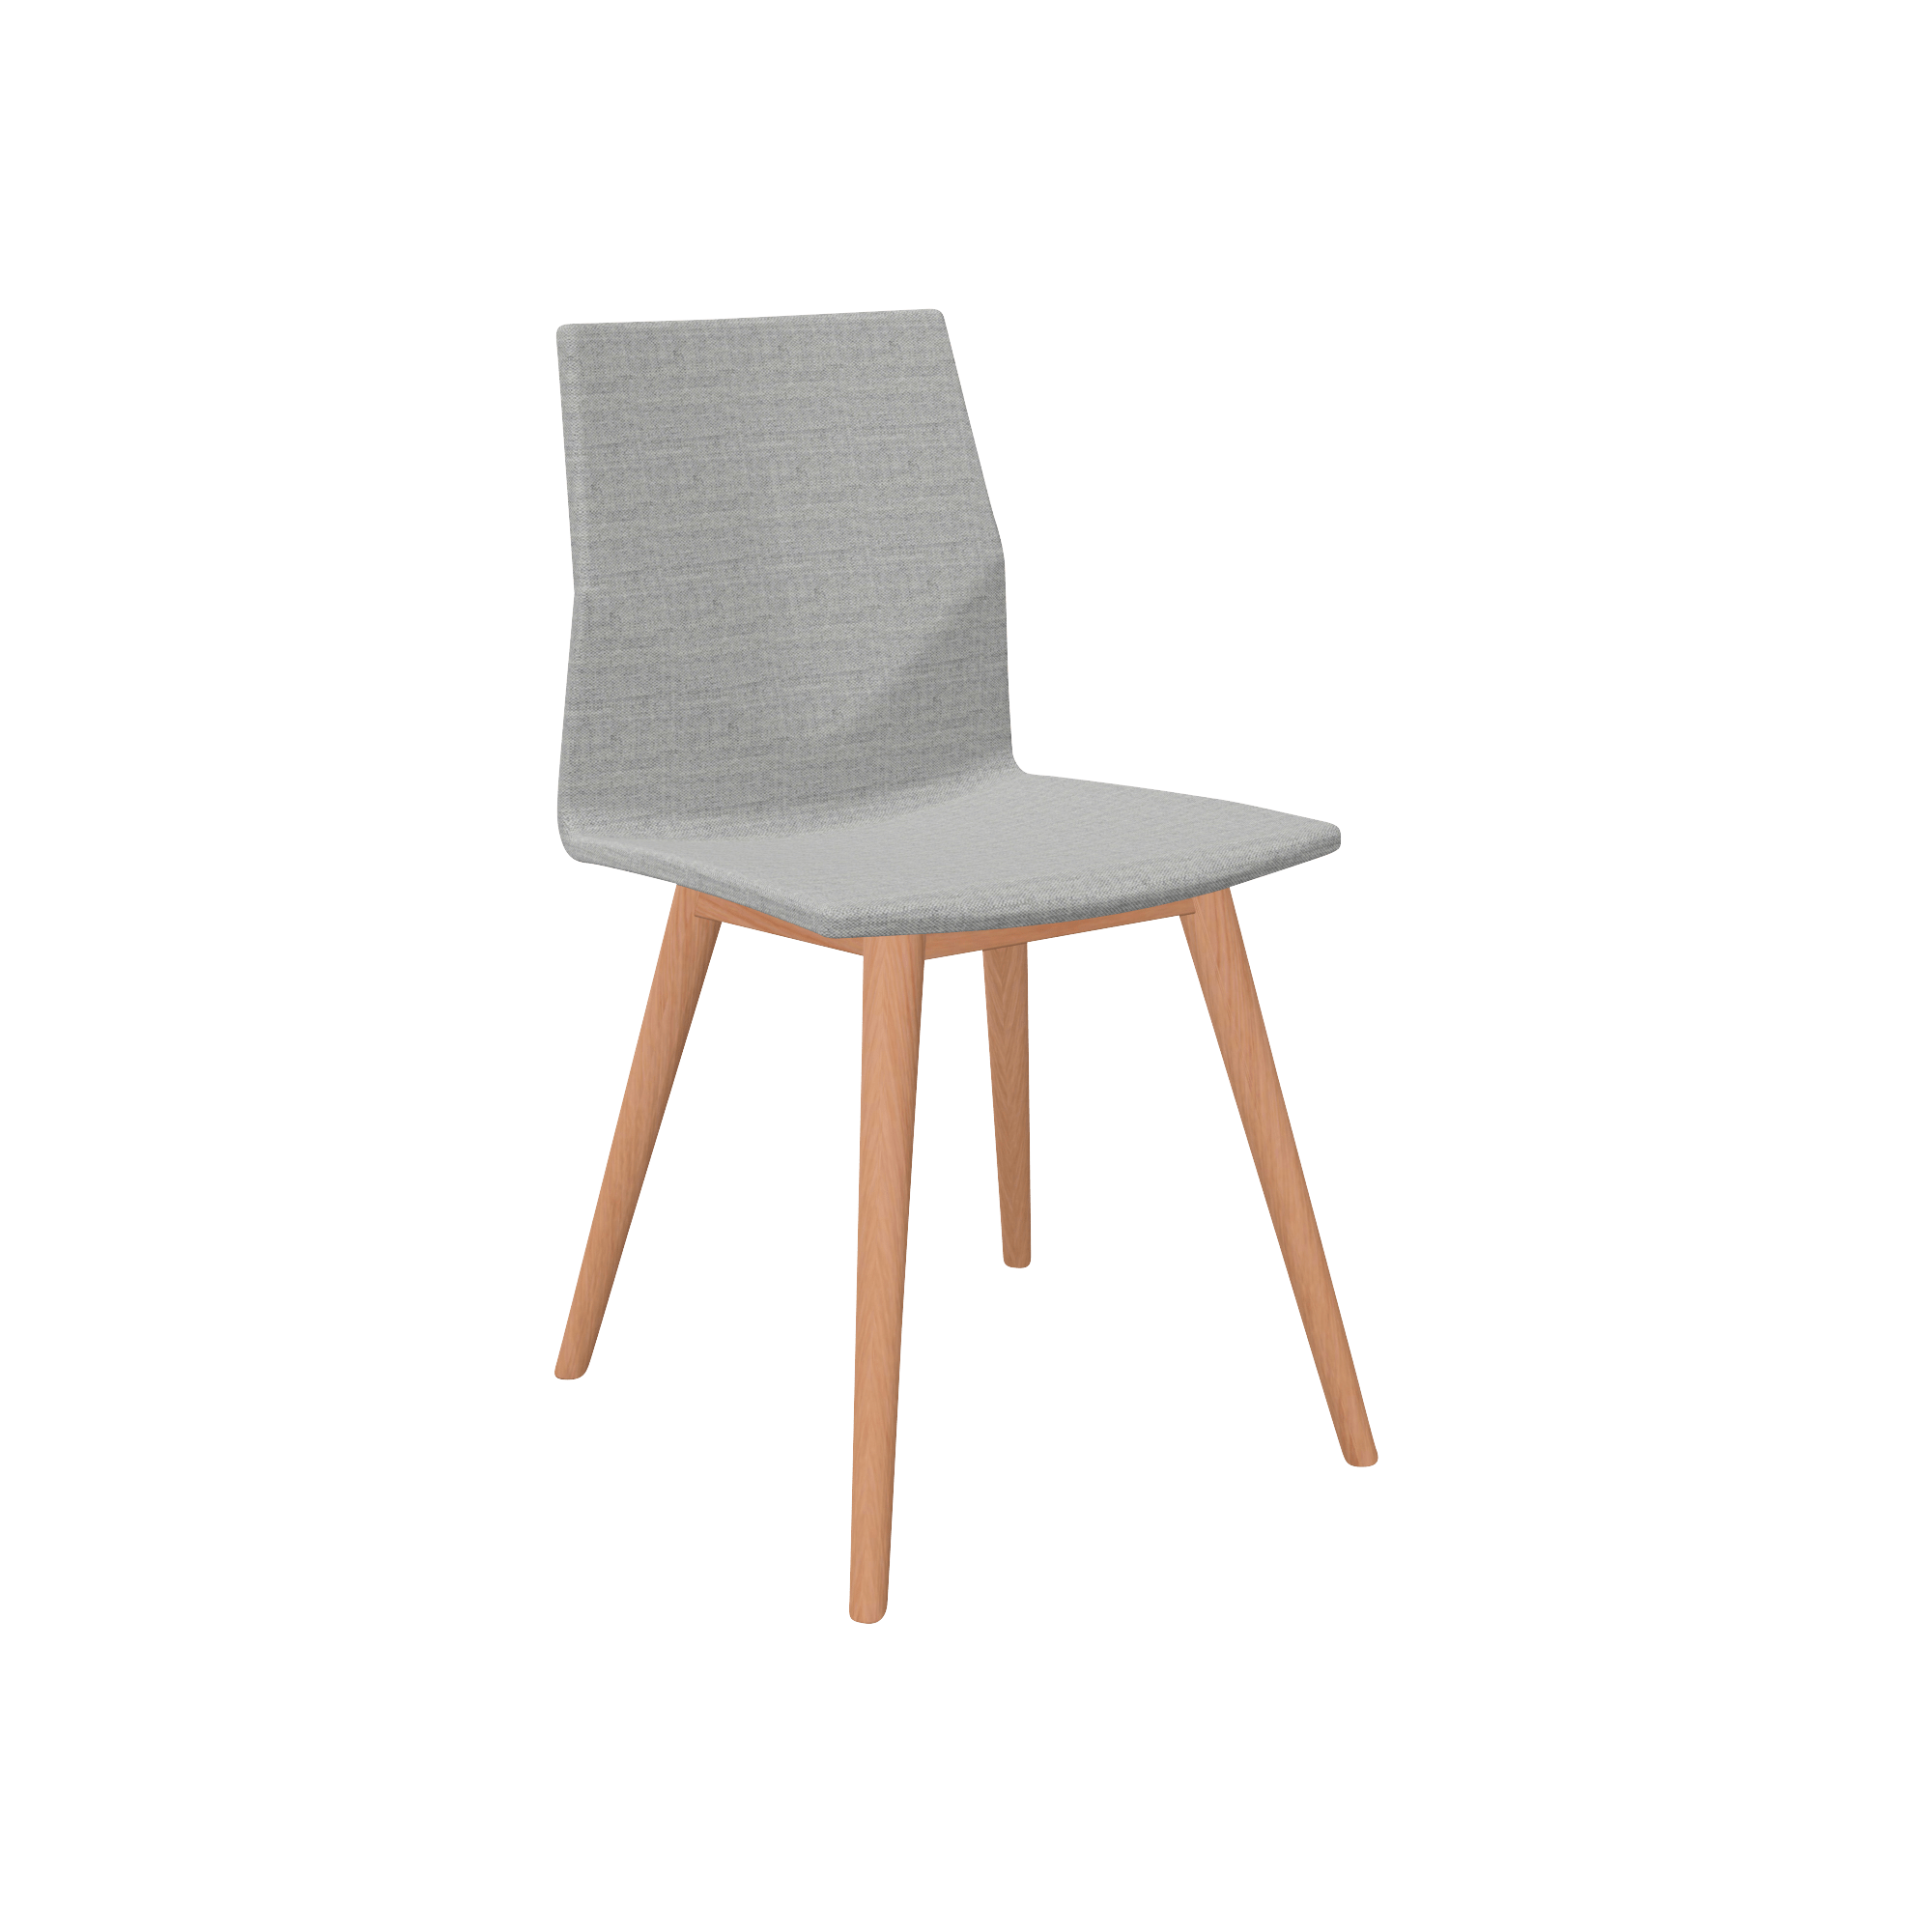 grey designer office chair with wooden legs